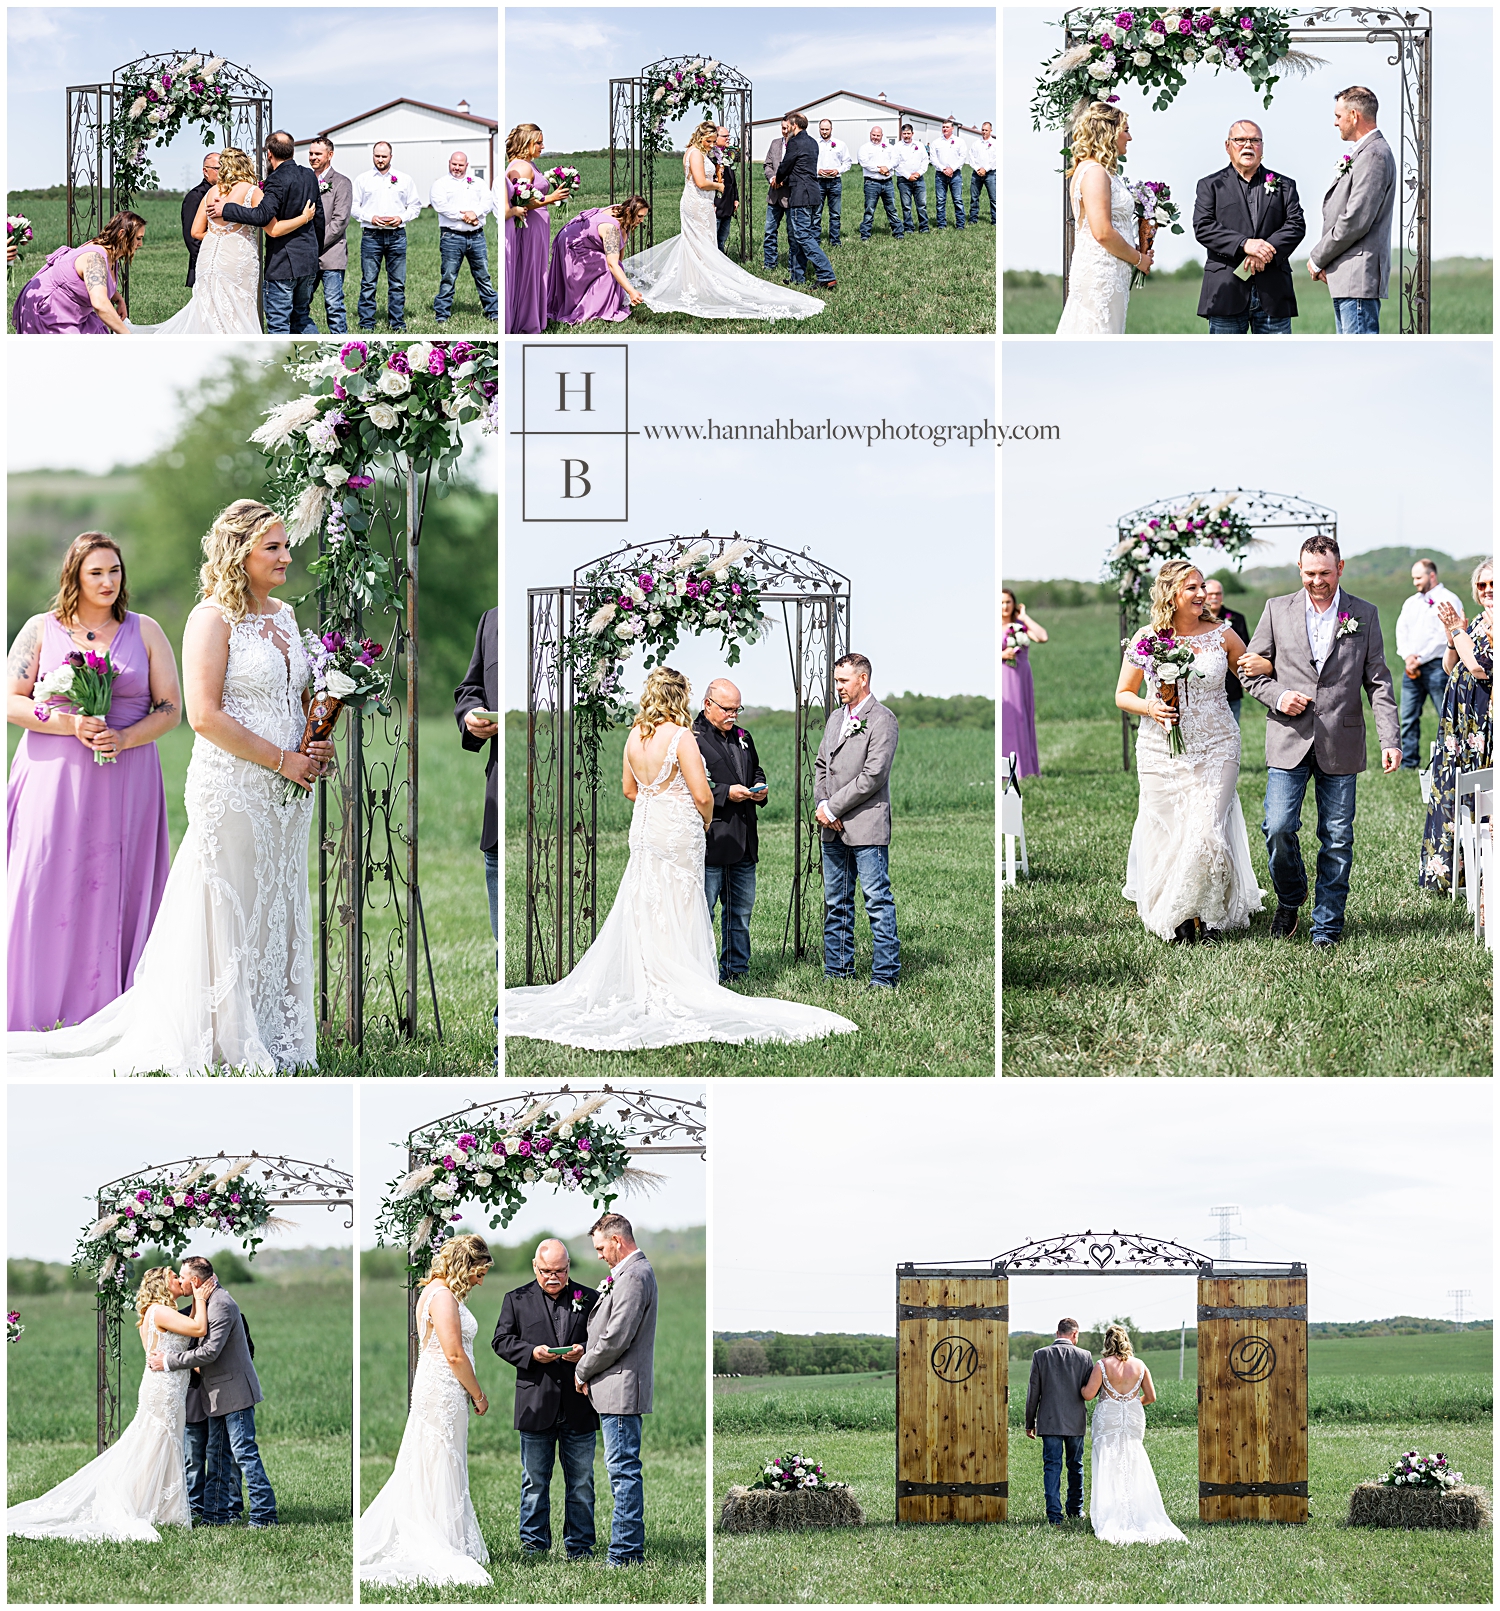 Collage of country wedding ceremony in field on beautiful, sunny day.